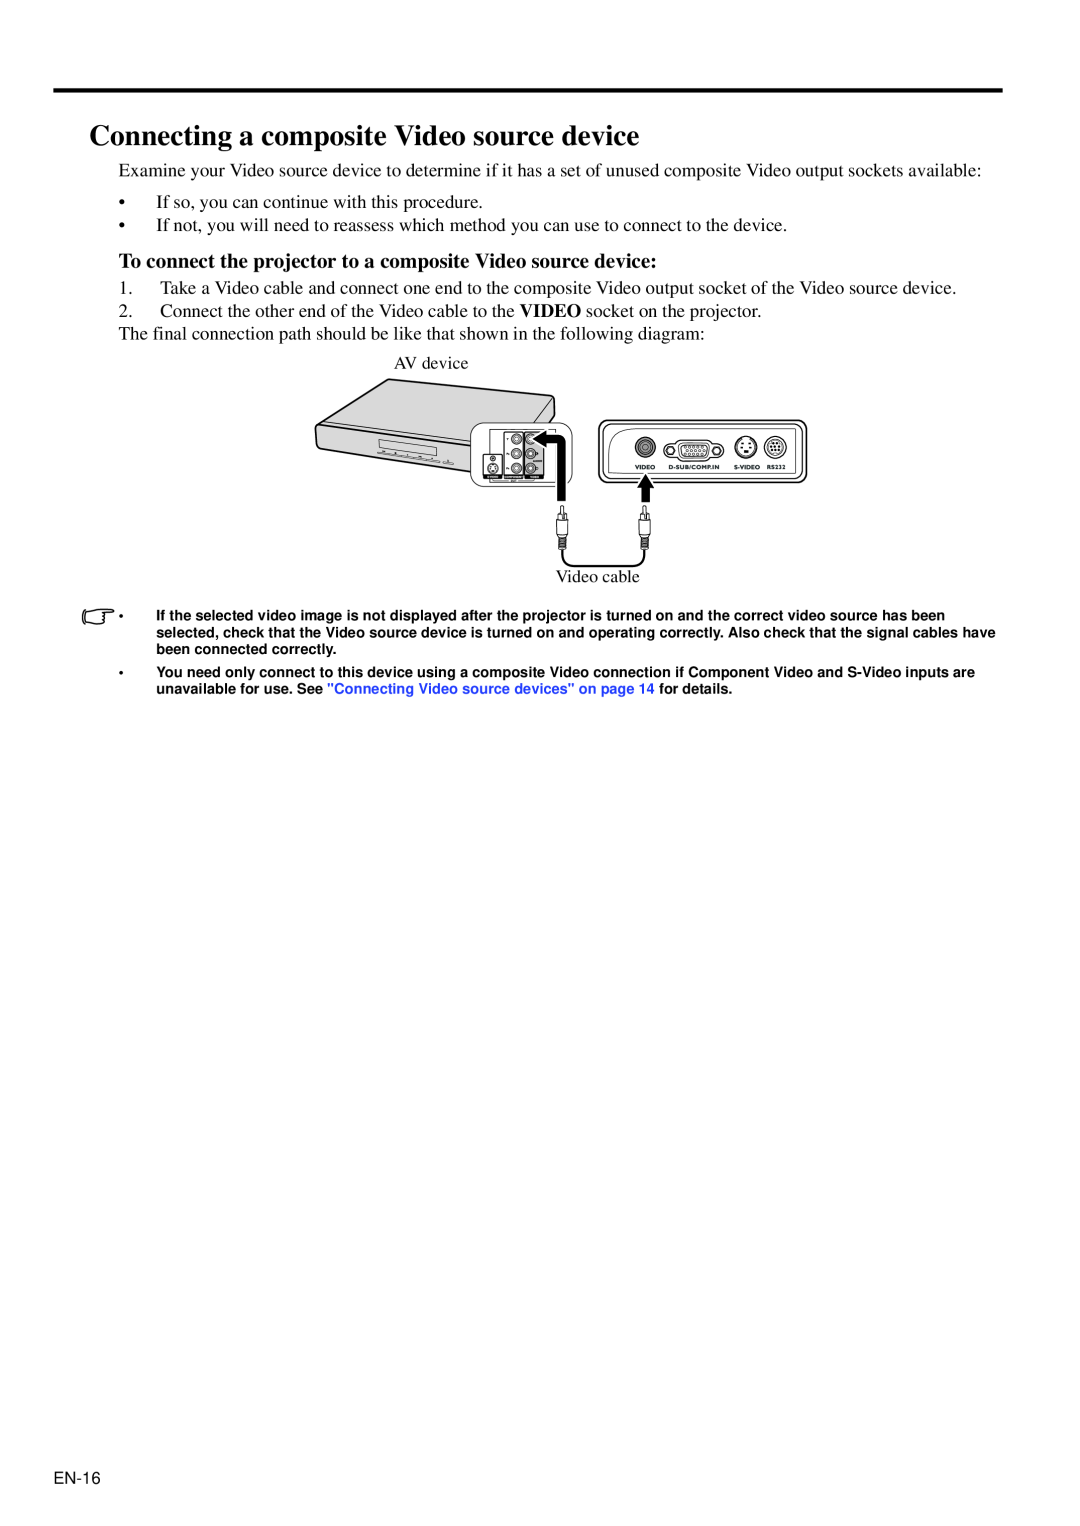 Mitsubishi Electronics XD95U user manual Connecting a composite Video source device 